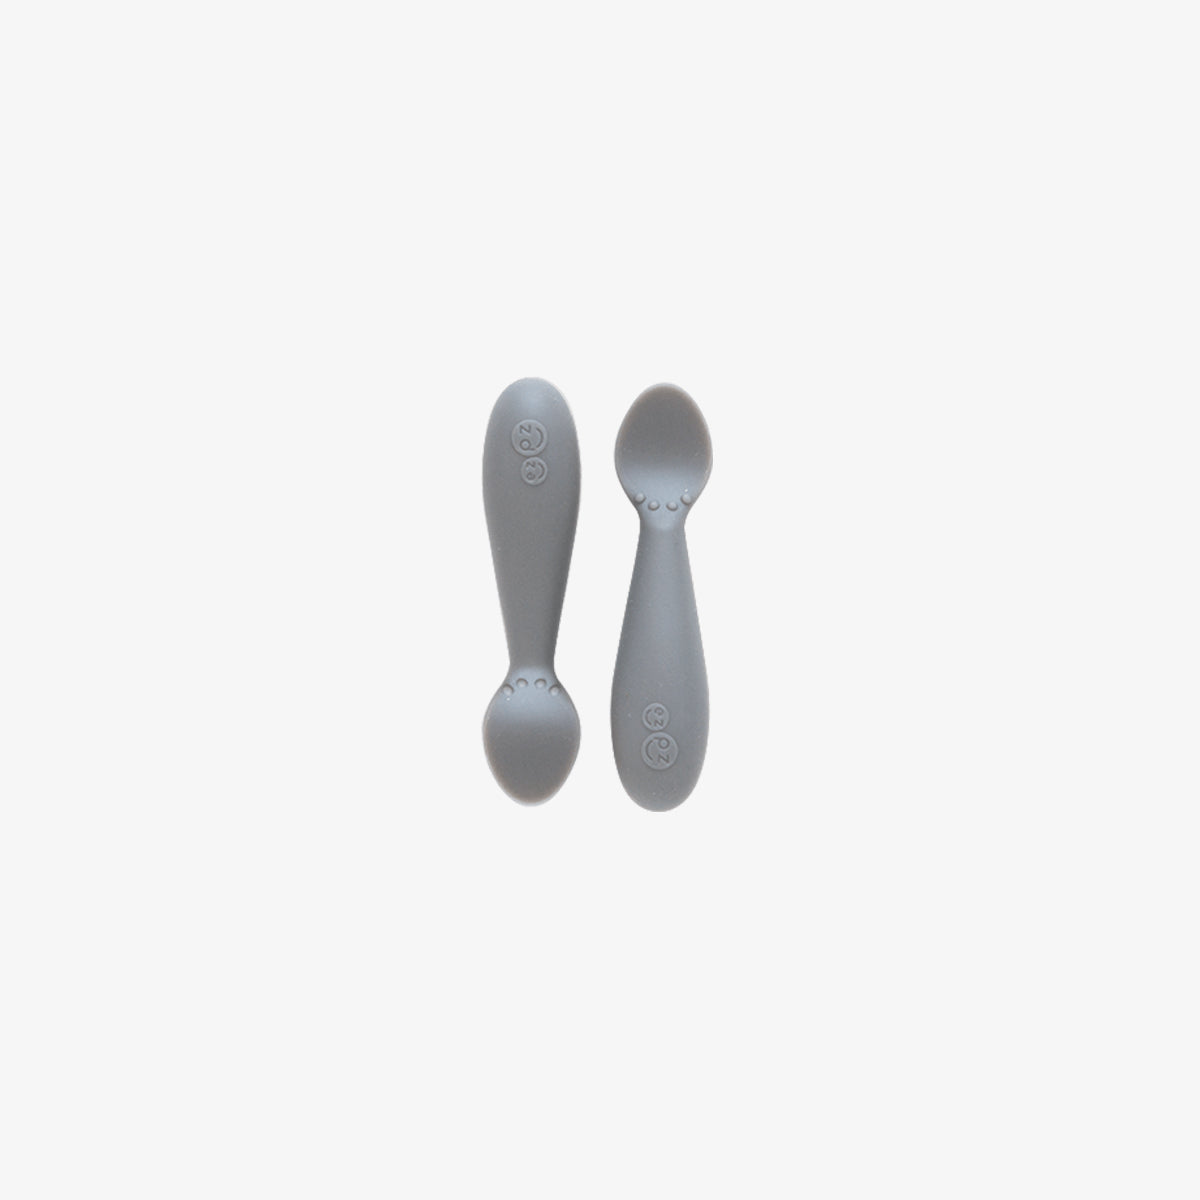 The Tiny Spoon in Gray by ezpz / Small, Sensory Silicone Spoon for Babies